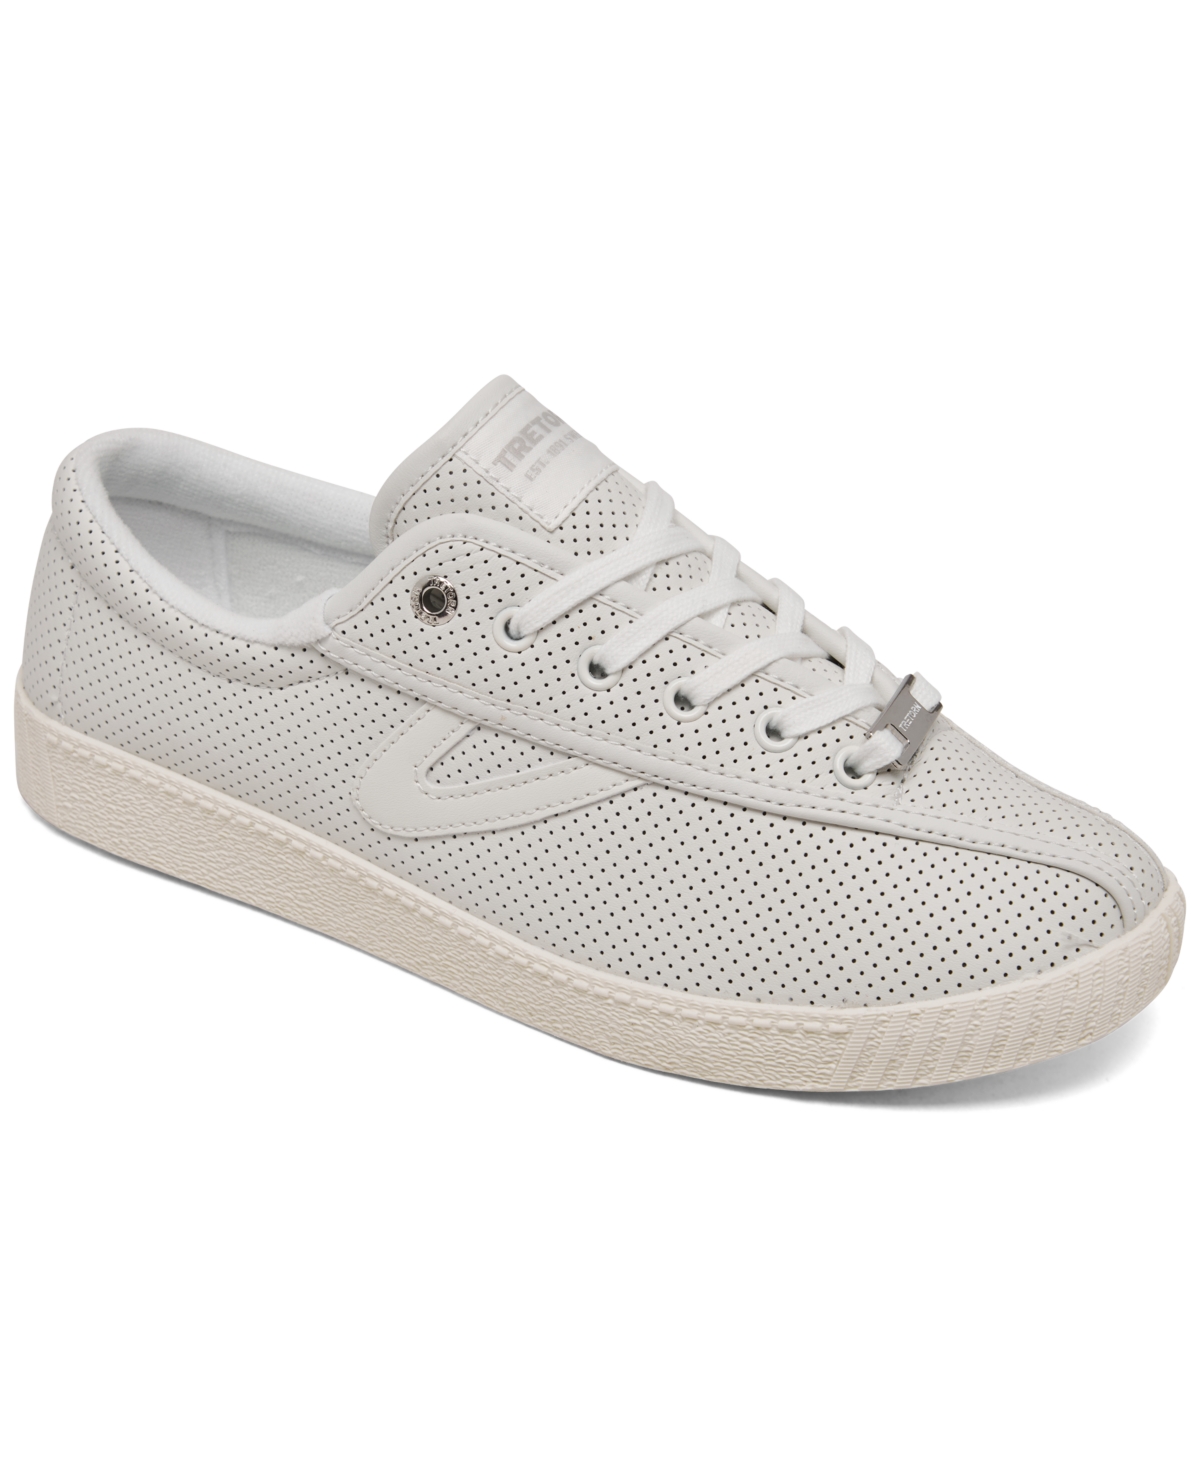 Women's Nylite Perforated Leather Casual Sneakers from Finish Line - White